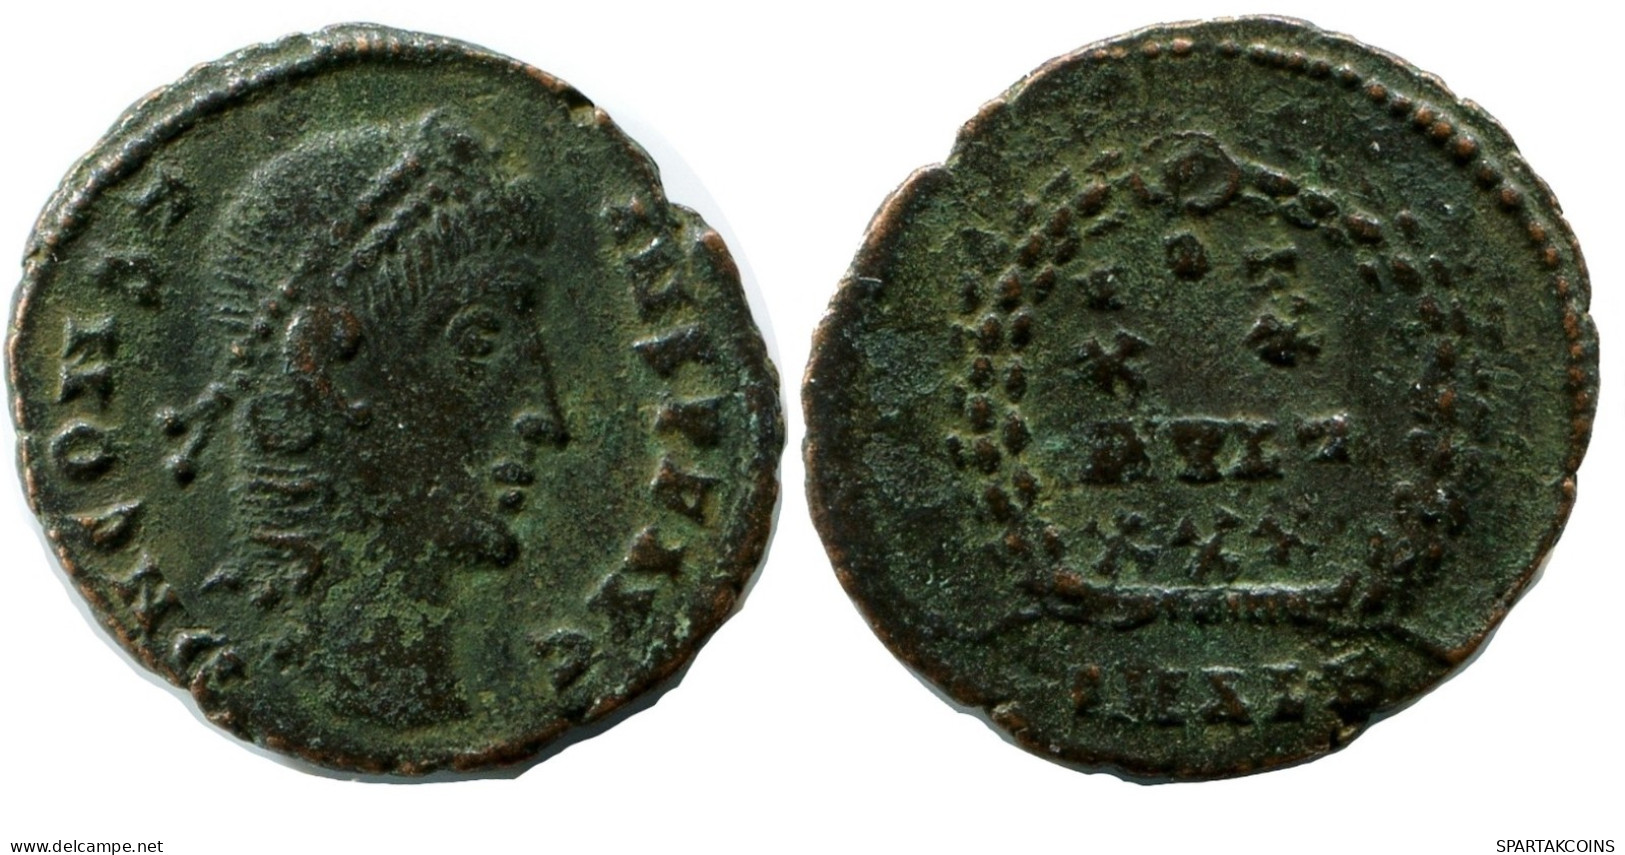 CONSTANS MINTED IN ALEKSANDRIA FROM THE ROYAL ONTARIO MUSEUM #ANC11365.14.E.A - El Imperio Christiano (307 / 363)